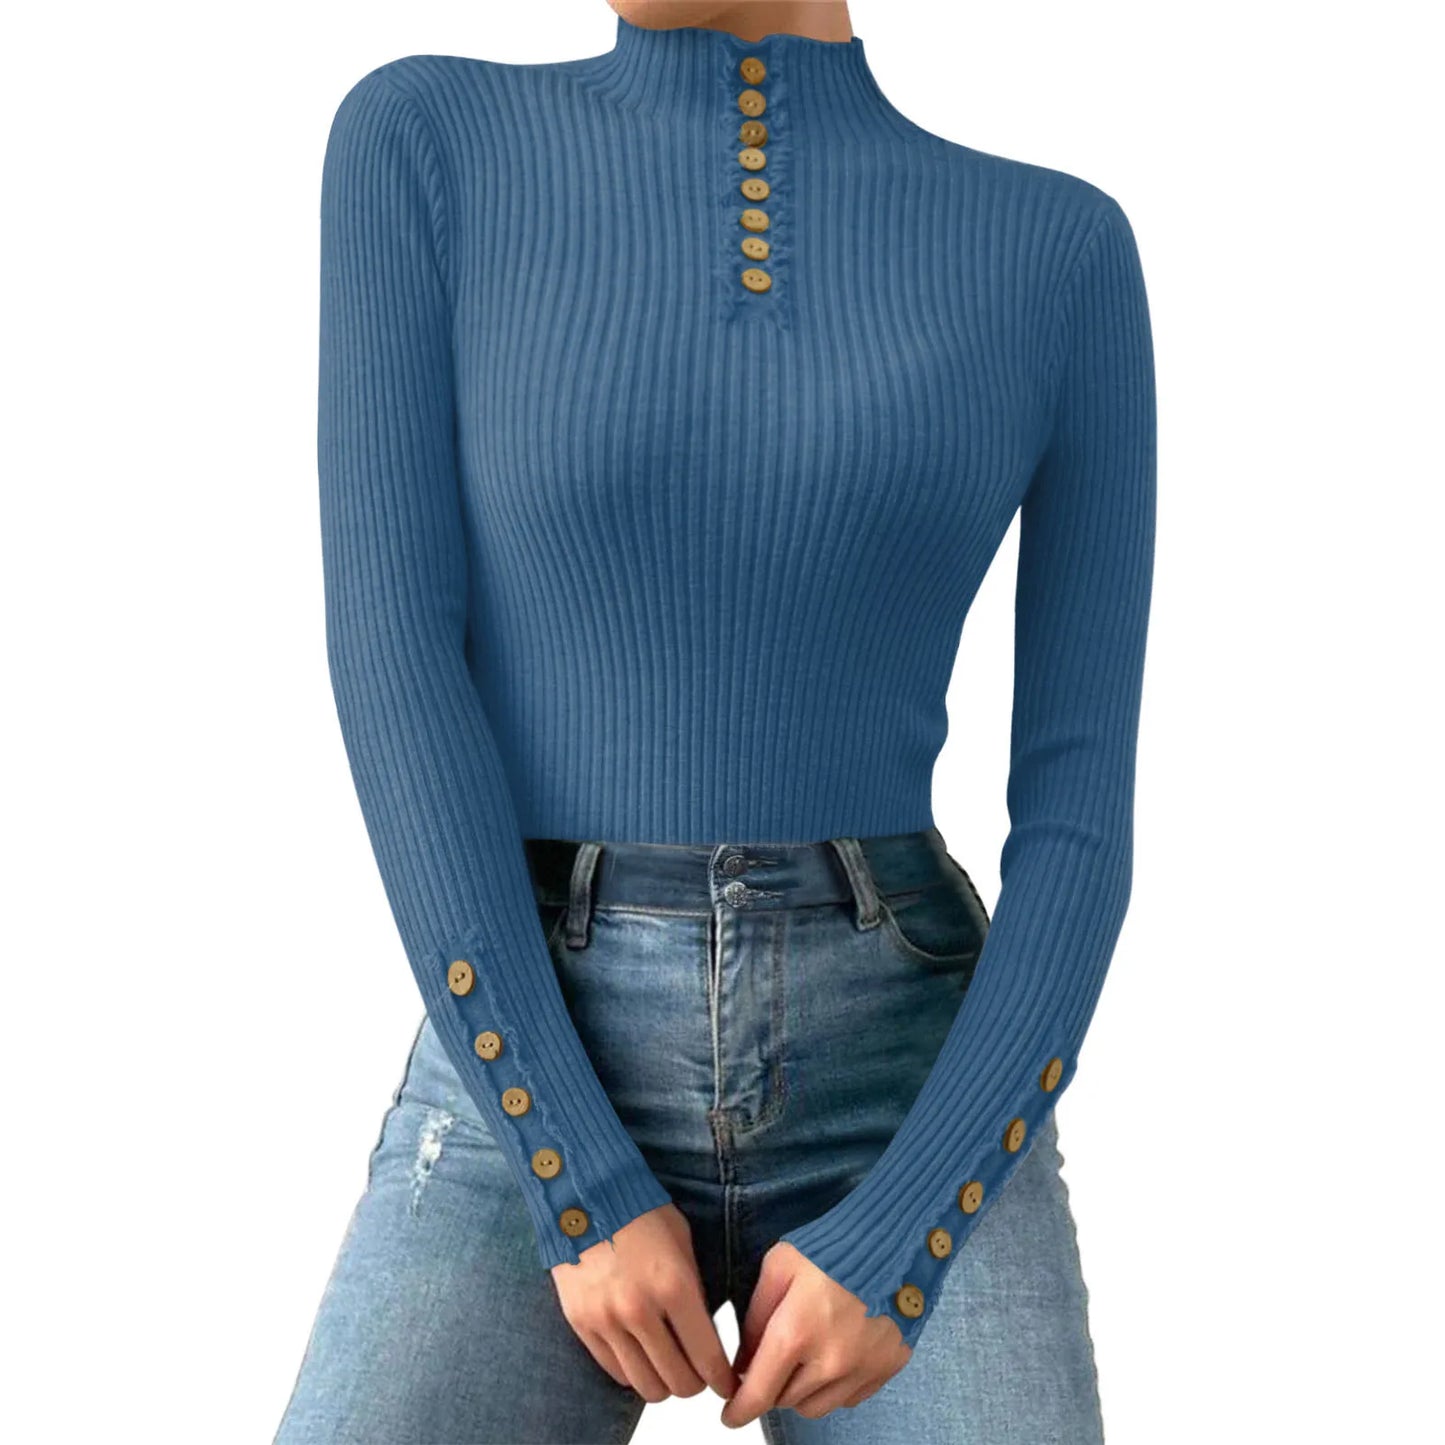 Fall/Winter Half Turtleneck Korean Fashion Elegant Basic Pullover Tops Women Casual Slim Long Sleeve Knitted Sweaters Jumpers